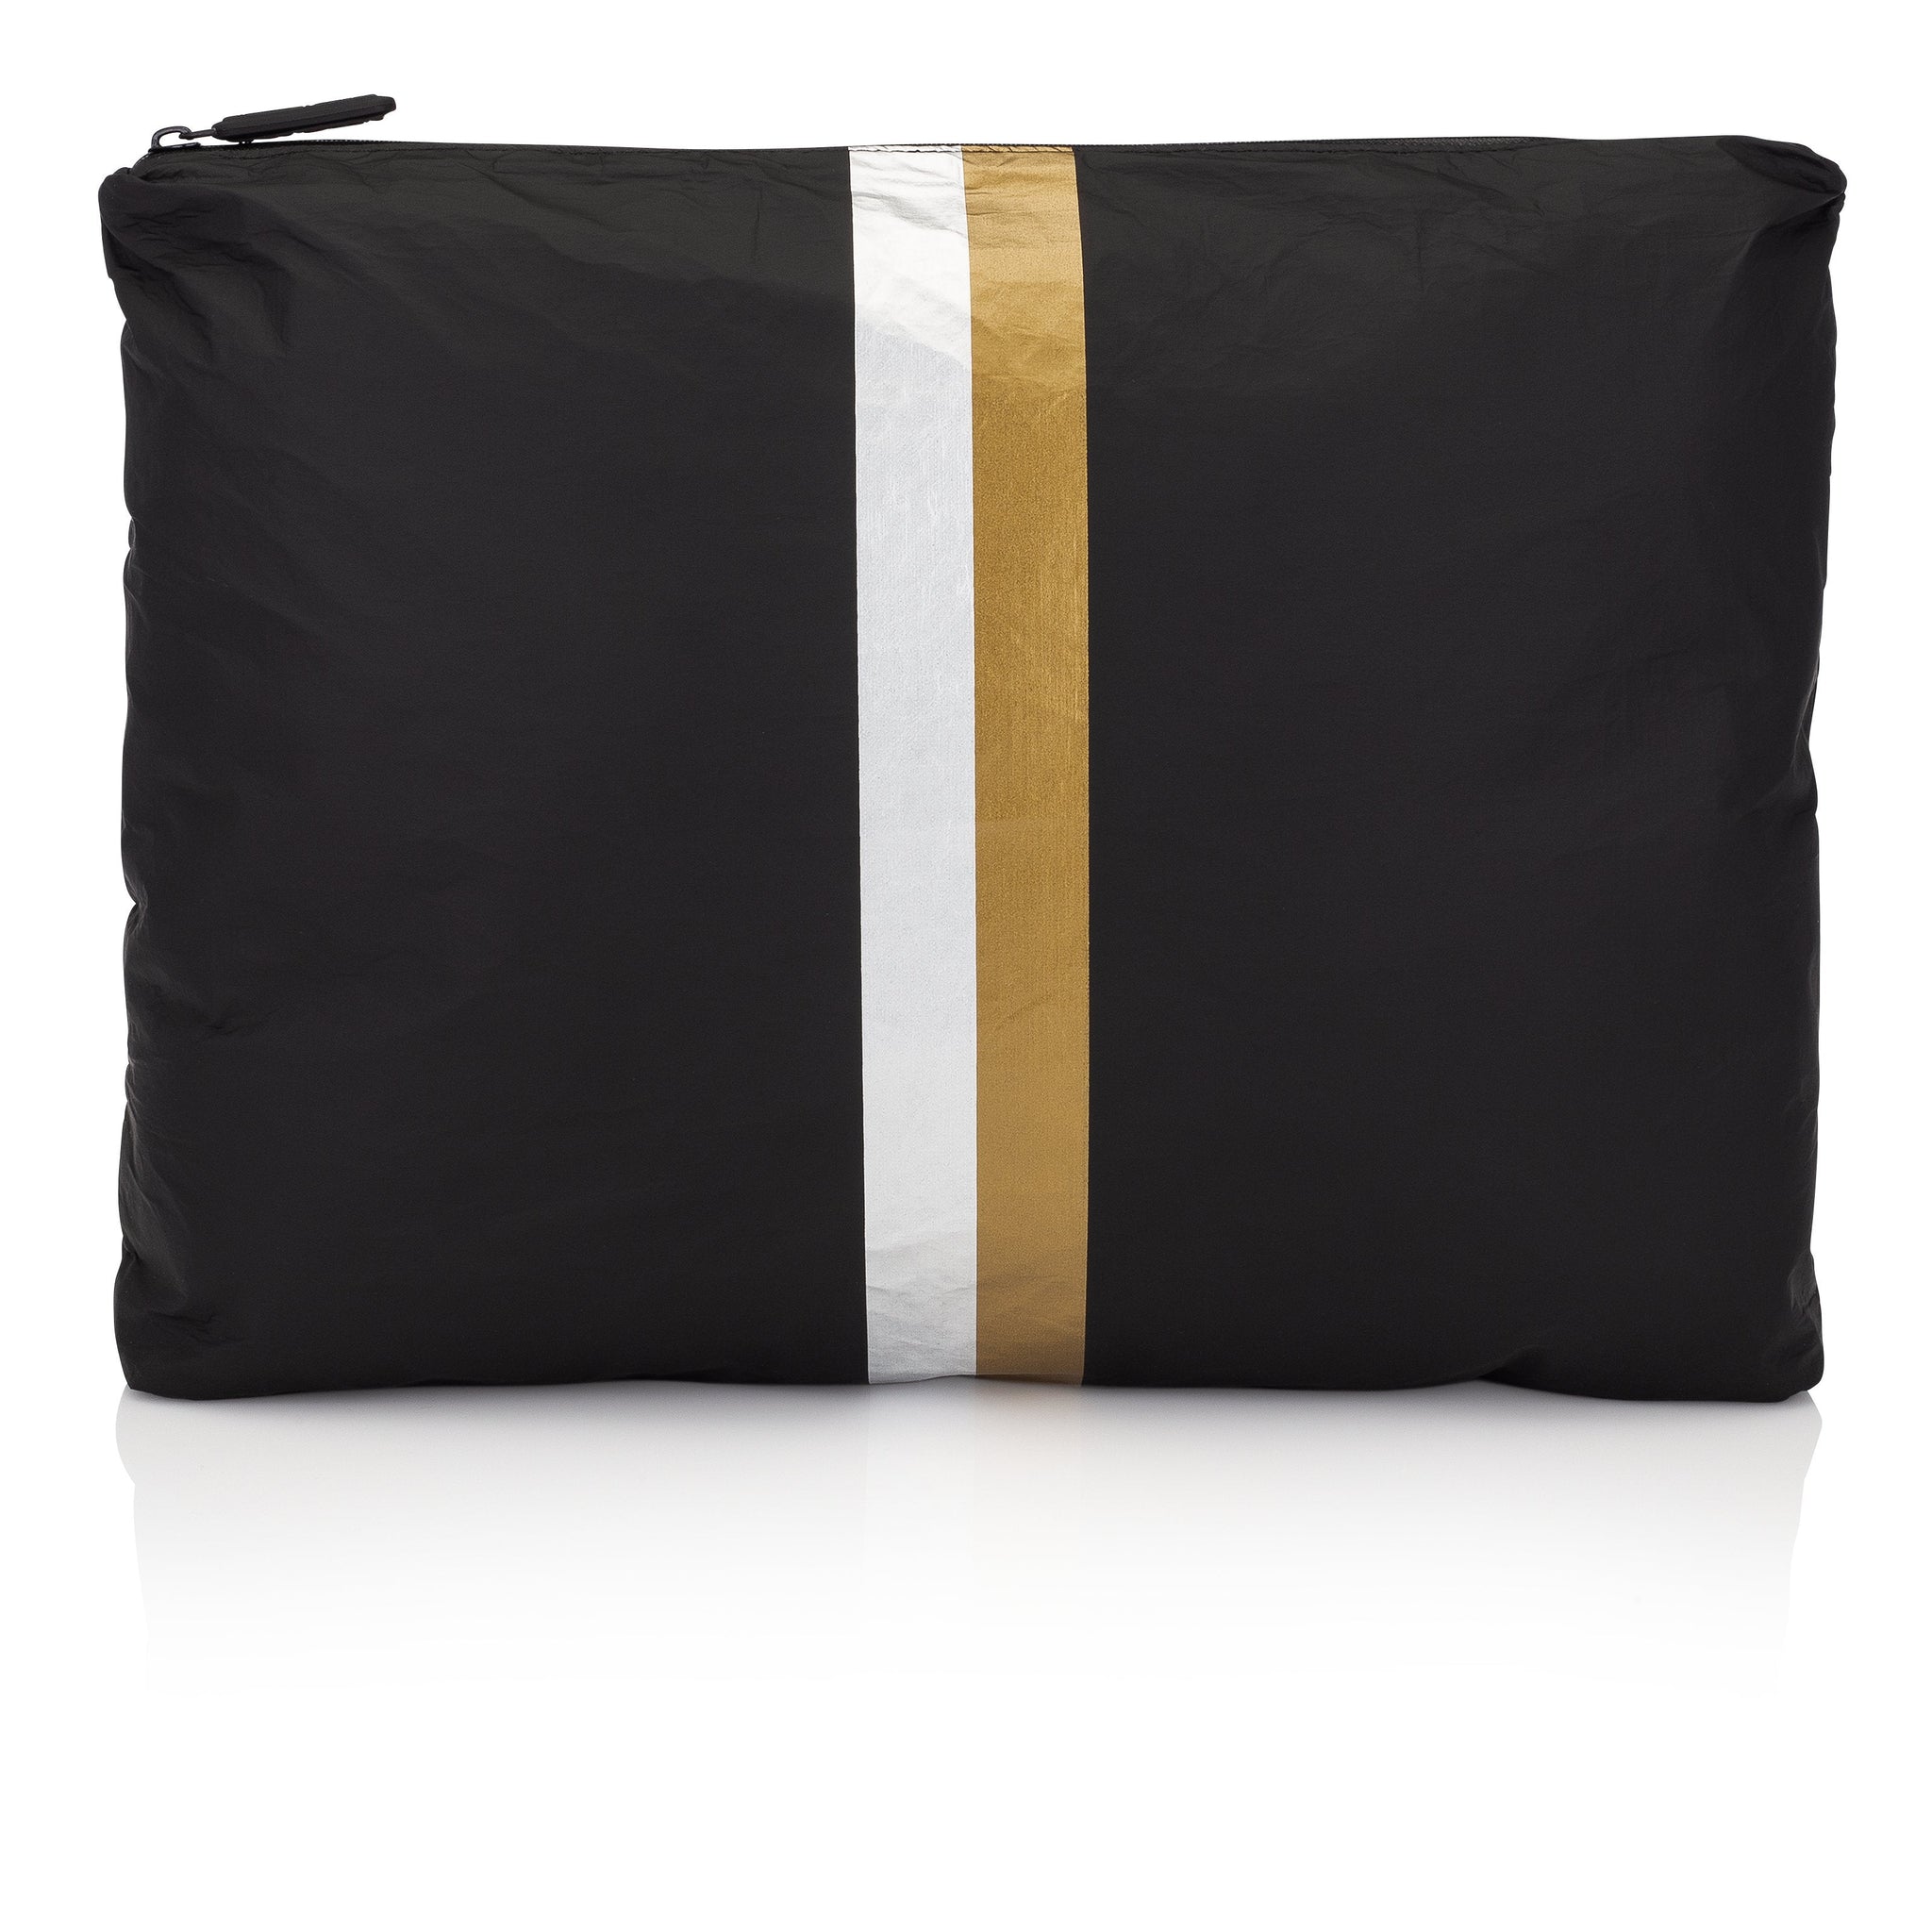 Jumbo Pack - Black HLT Collection with Metallic Silver and Gold Stripes